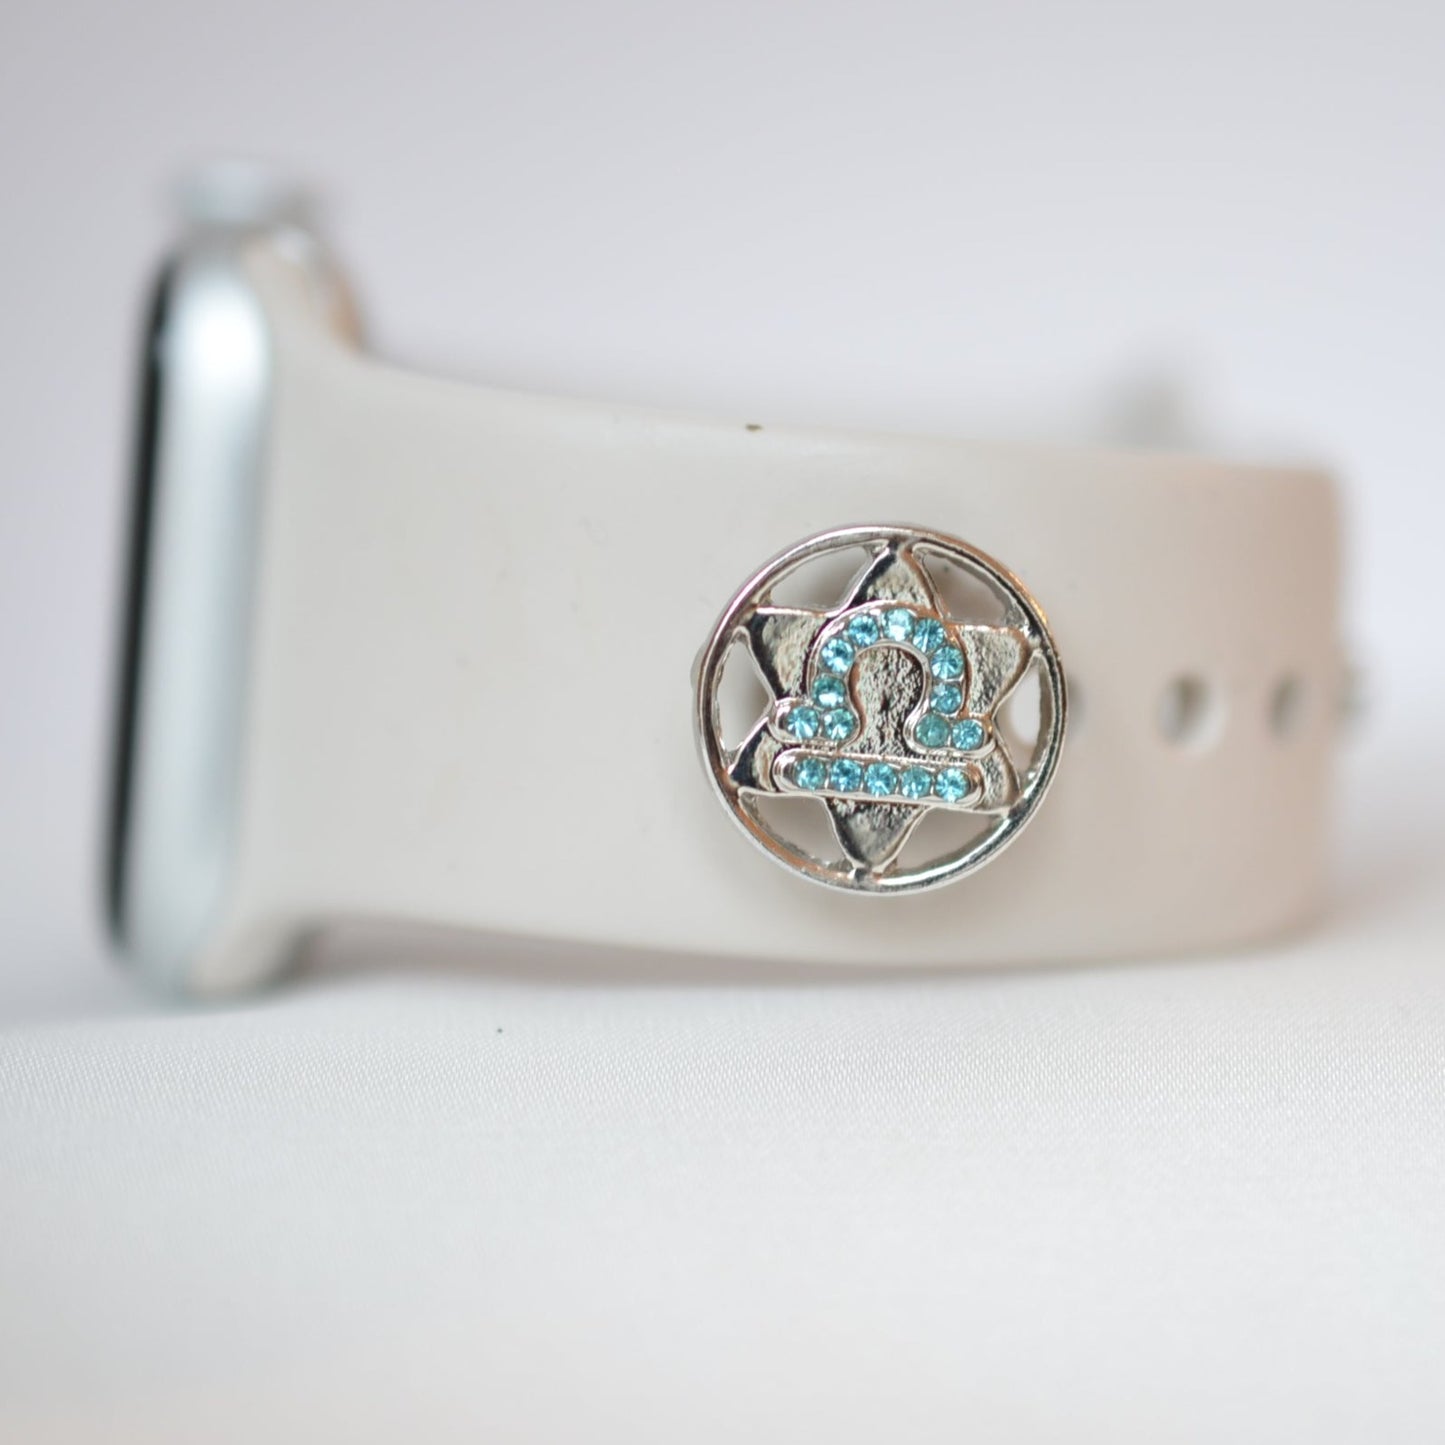 Zodiac Charm for Belt, Bag and Watch Bands (Libra)